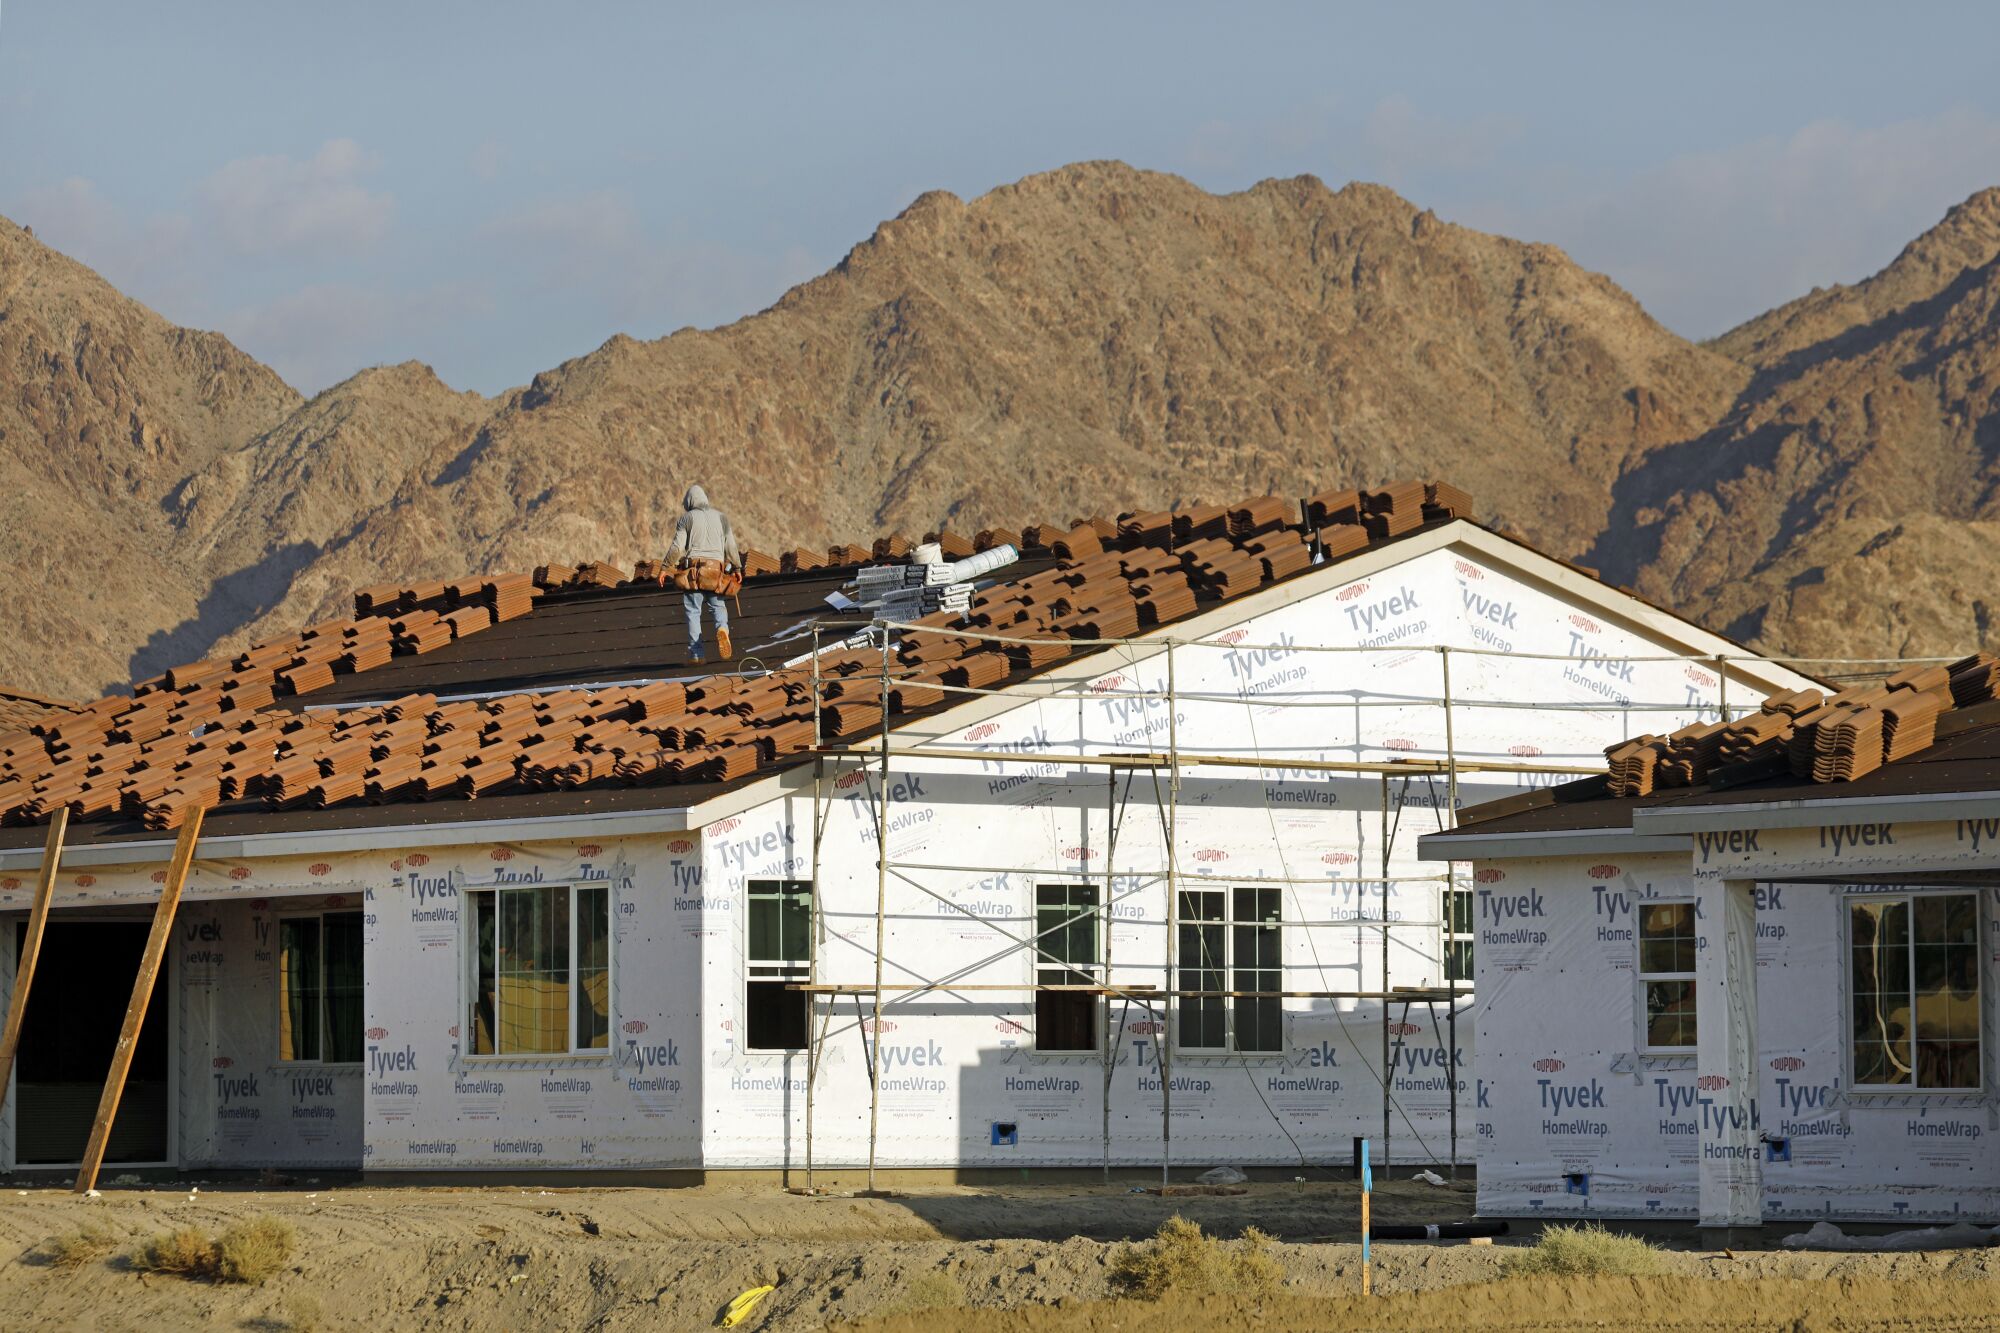 Building a house in the desert.